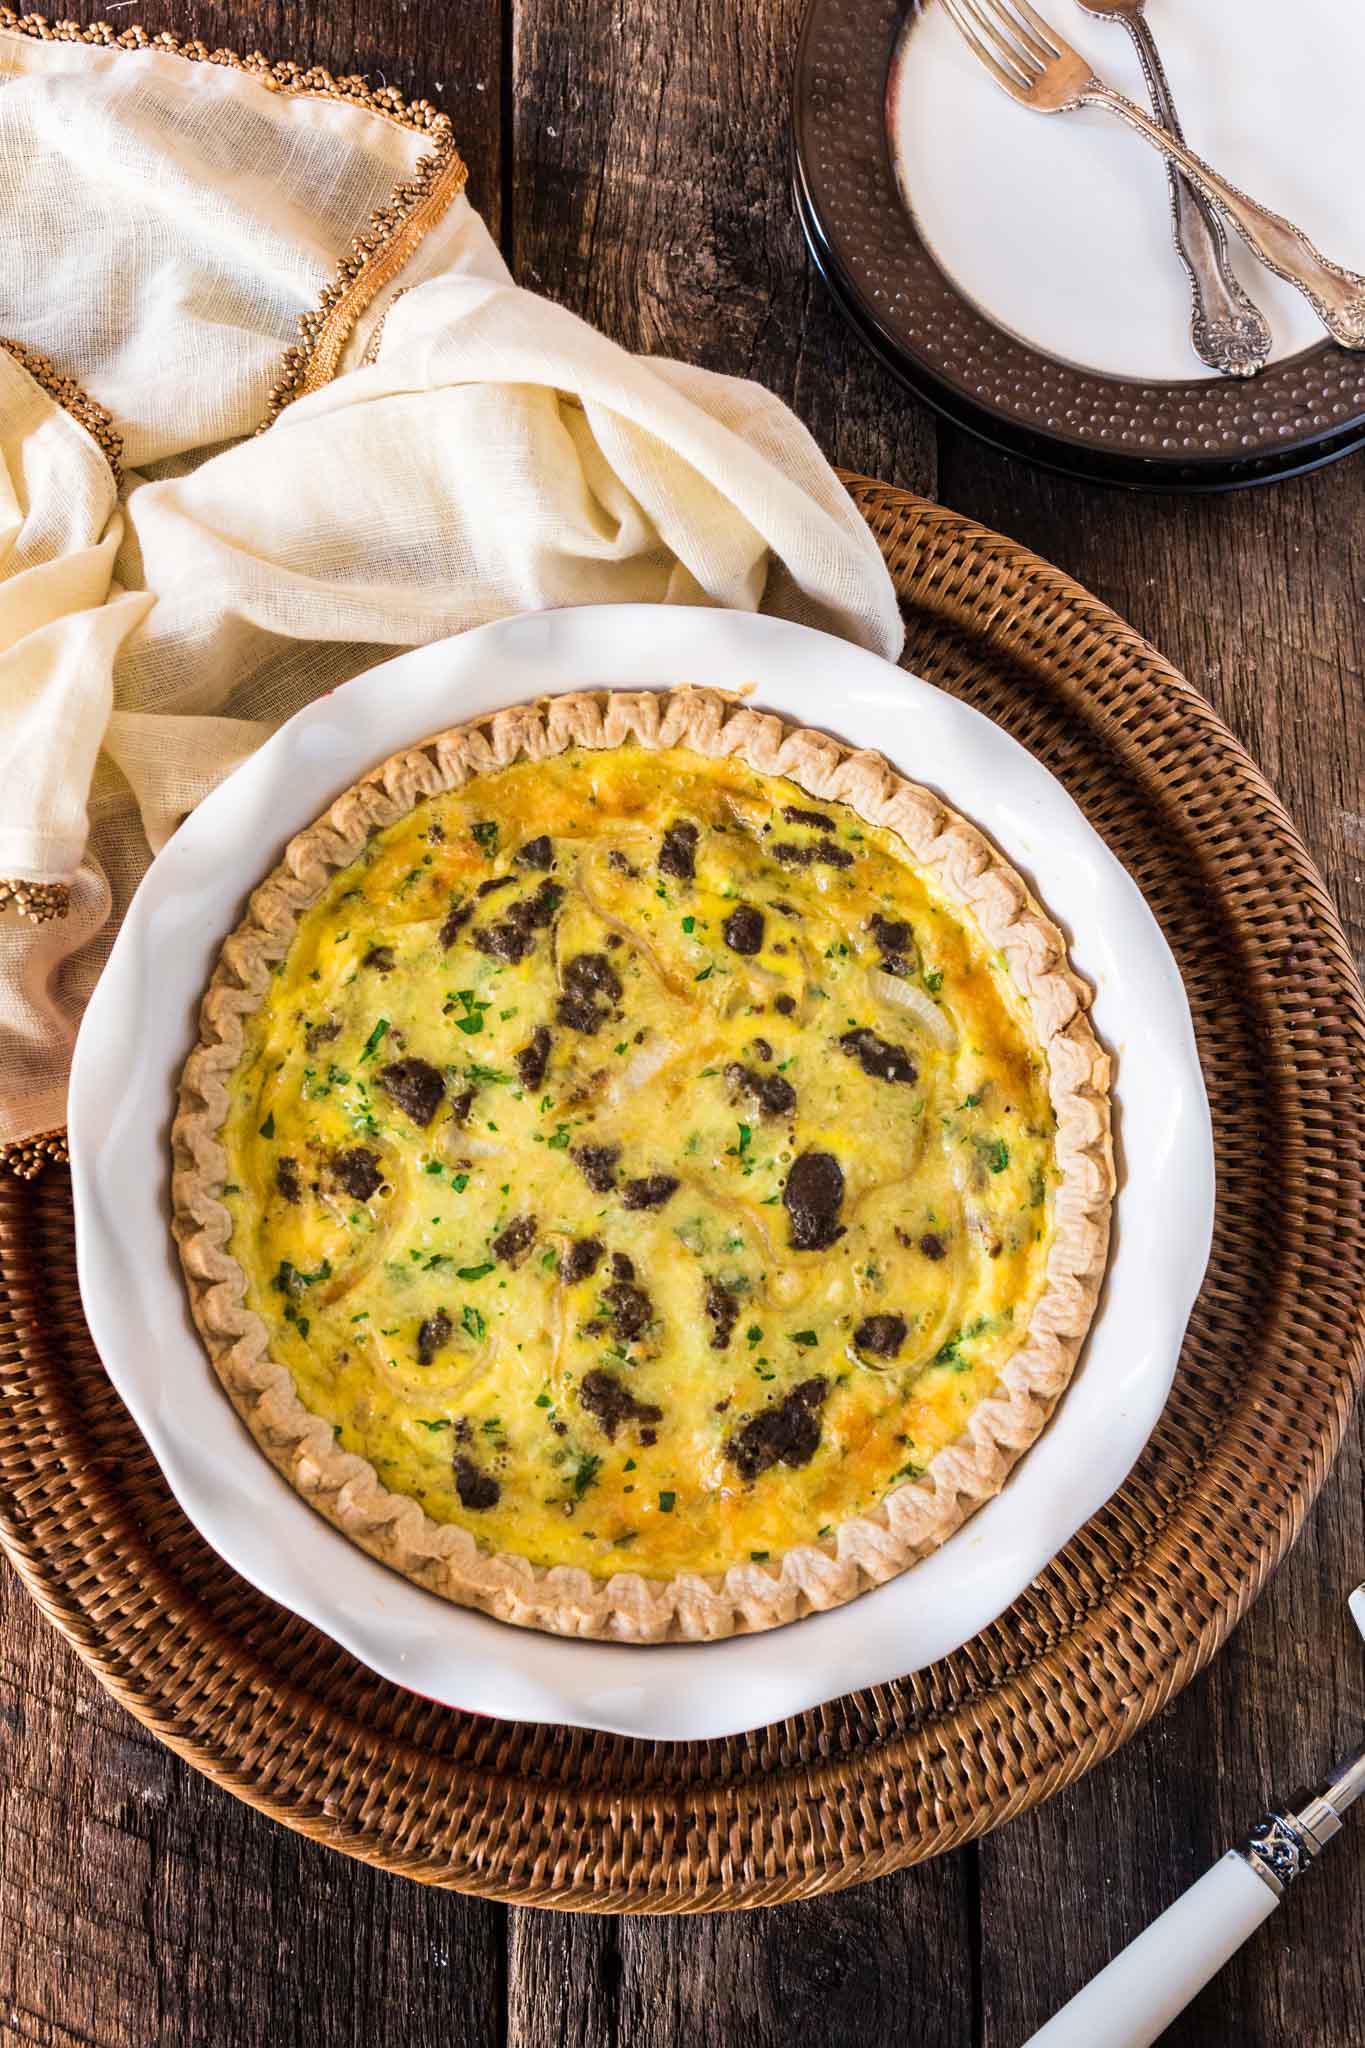 Turkey Sausage and Smoked Gouda Quiche | www.oliviascuisine.com | Easy and delicious, this Turkey Sausage and Smoked Gouda Quiche is the perfect dish for when you need to come up with something special for a last minute casual gathering, like breakfast or brunch with friends.